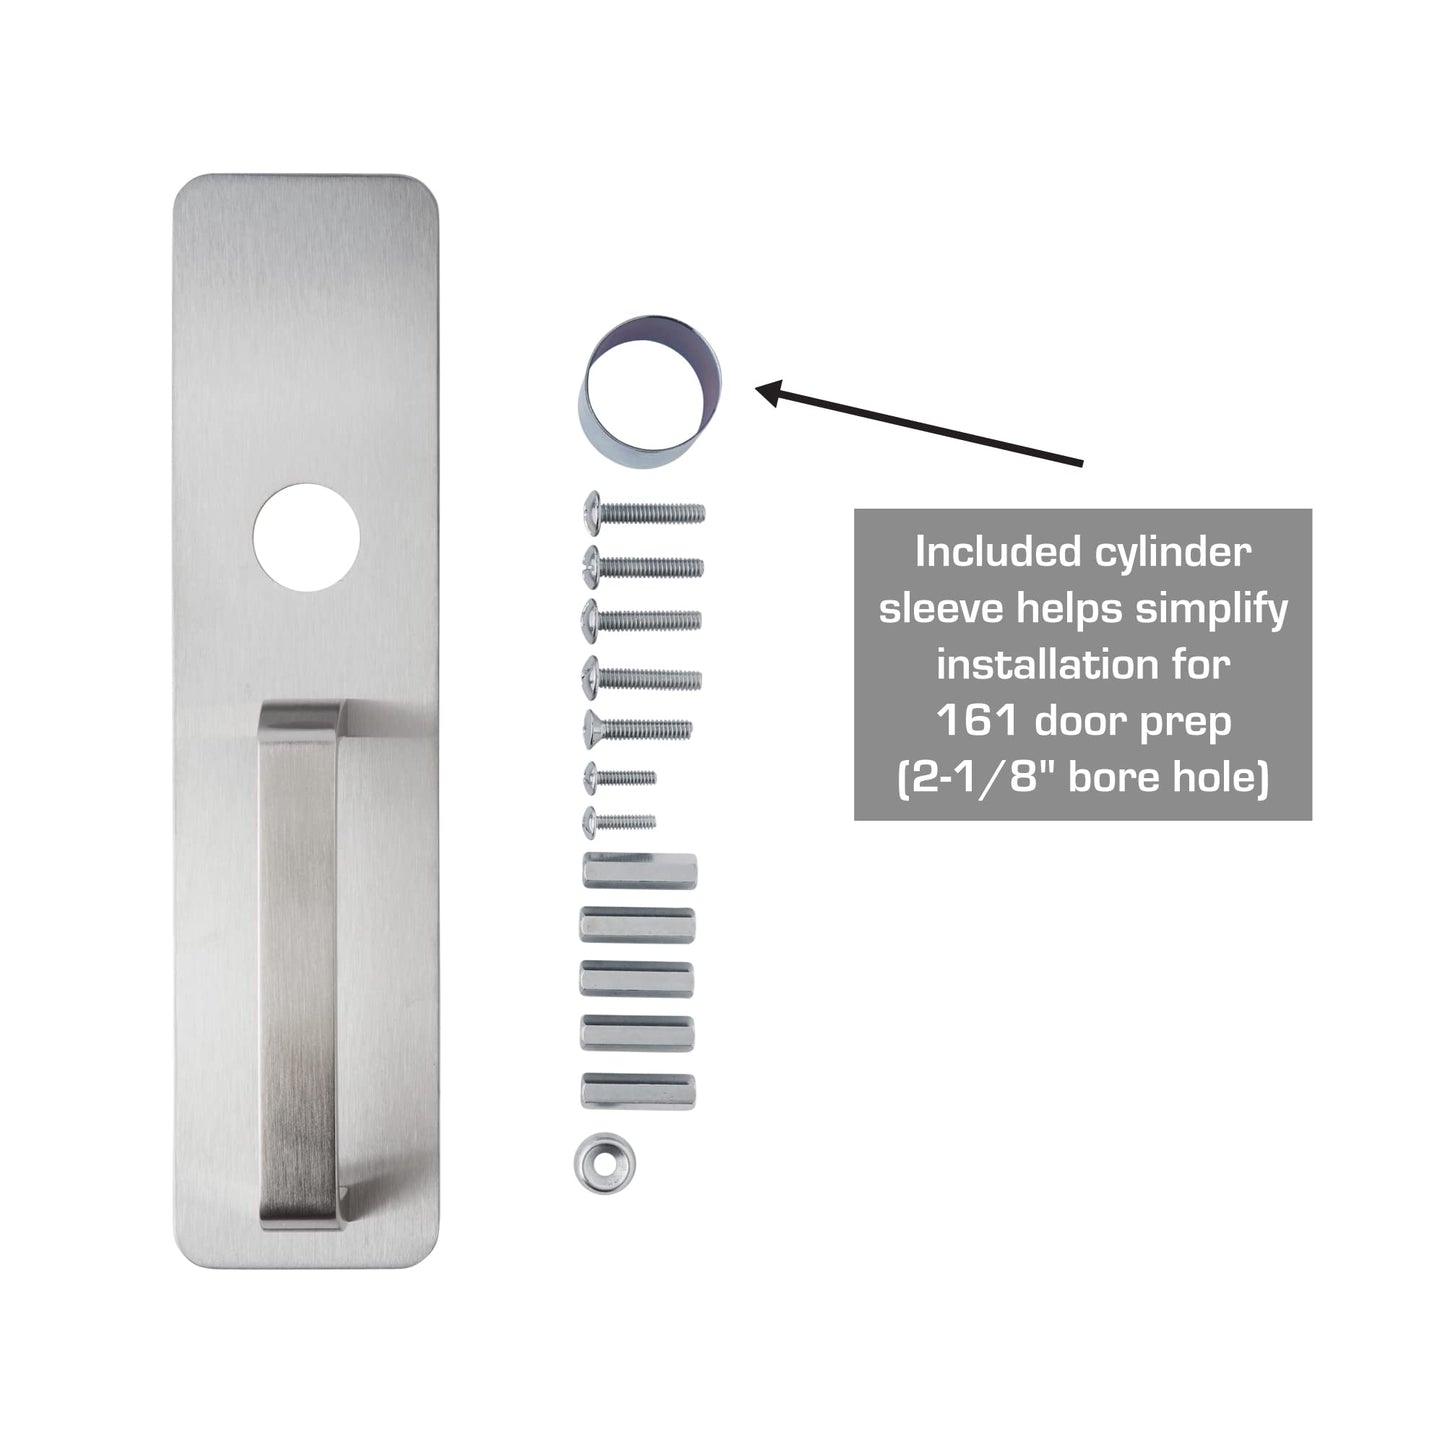 BRINKS Commercial - Commercial Door Pull Plate with Cylinder Hole, Satin Chrome Finish - Meets ANSI Grade 1 Standards, is UL Listed, and is ADA Compliant